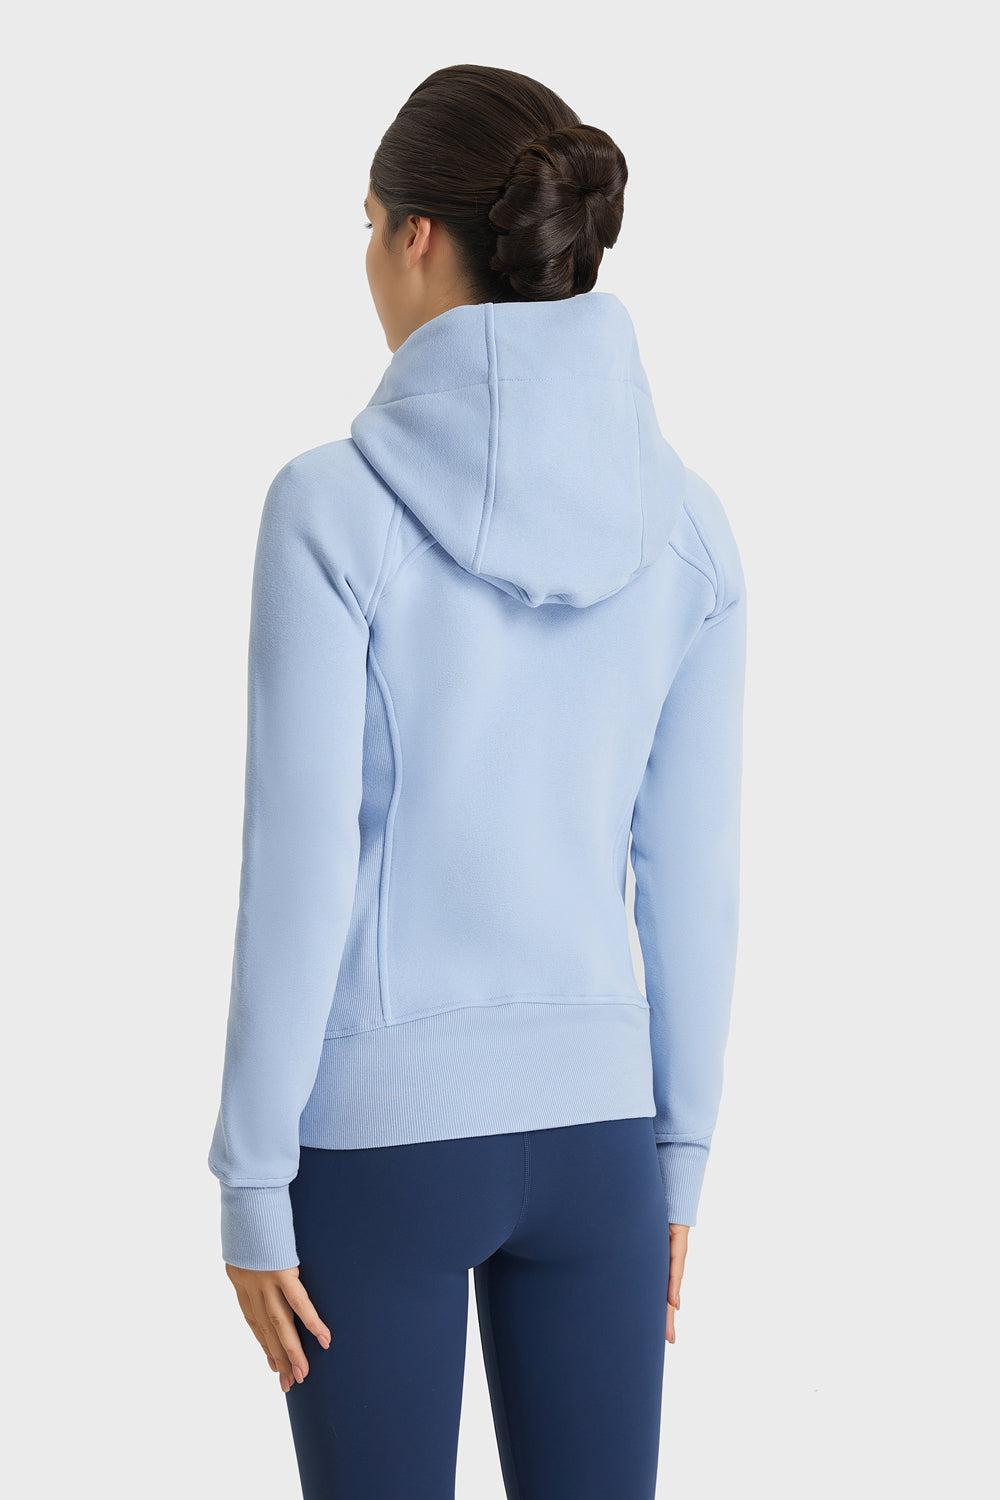 Zip Up Seam Detail Hooded Sports Jacket-TOPS / DRESSES-[Adult]-[Female]-Blue Zone Planet